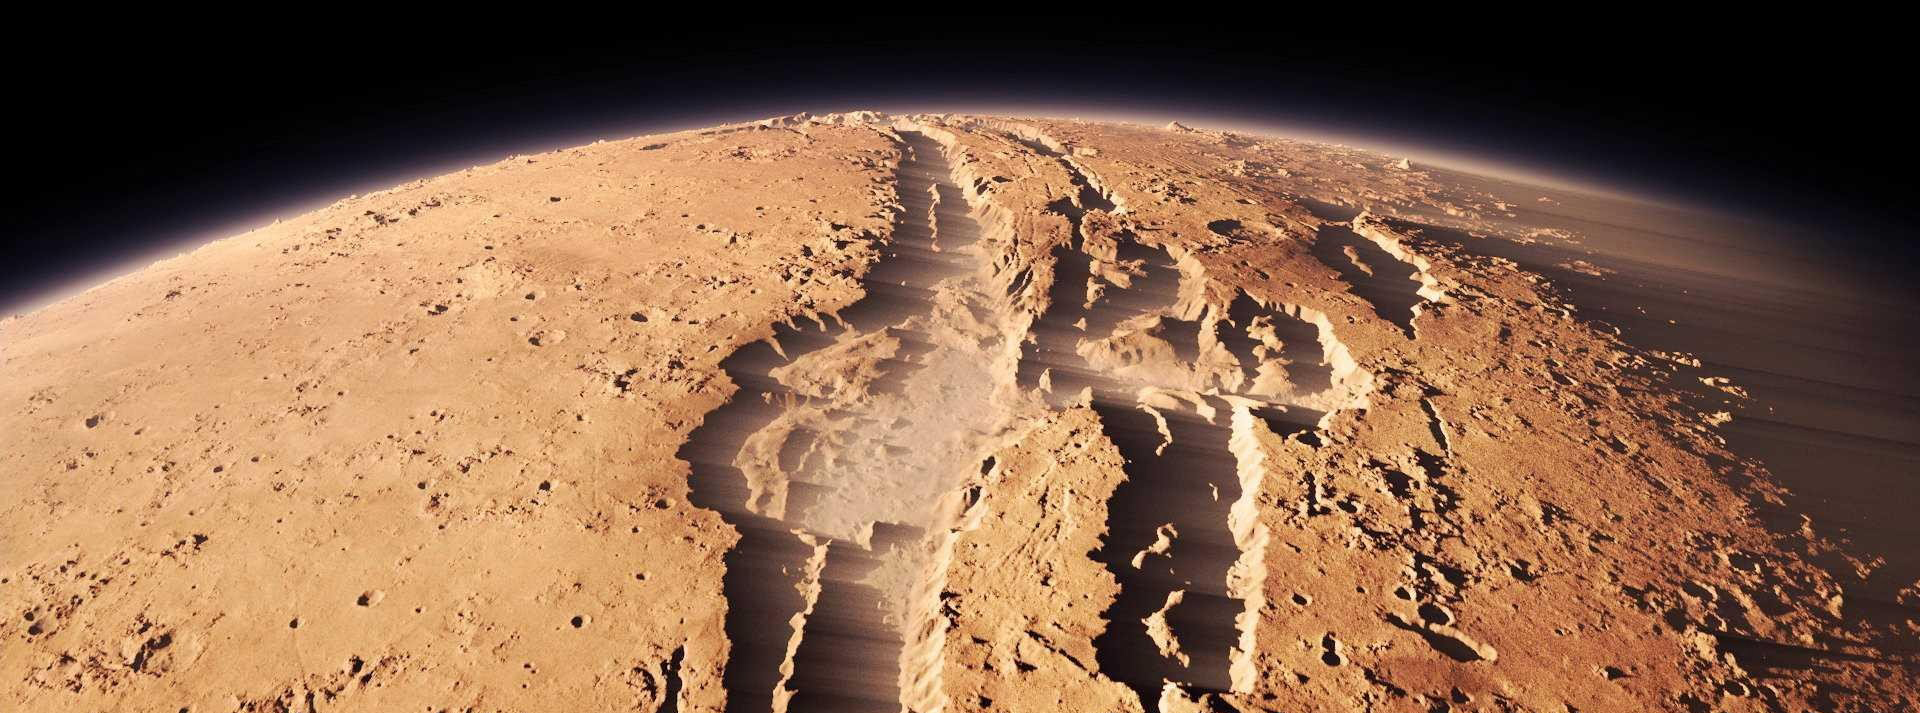 SPACEFLIGHT TO BRING ASTRONAUTS TO MARS